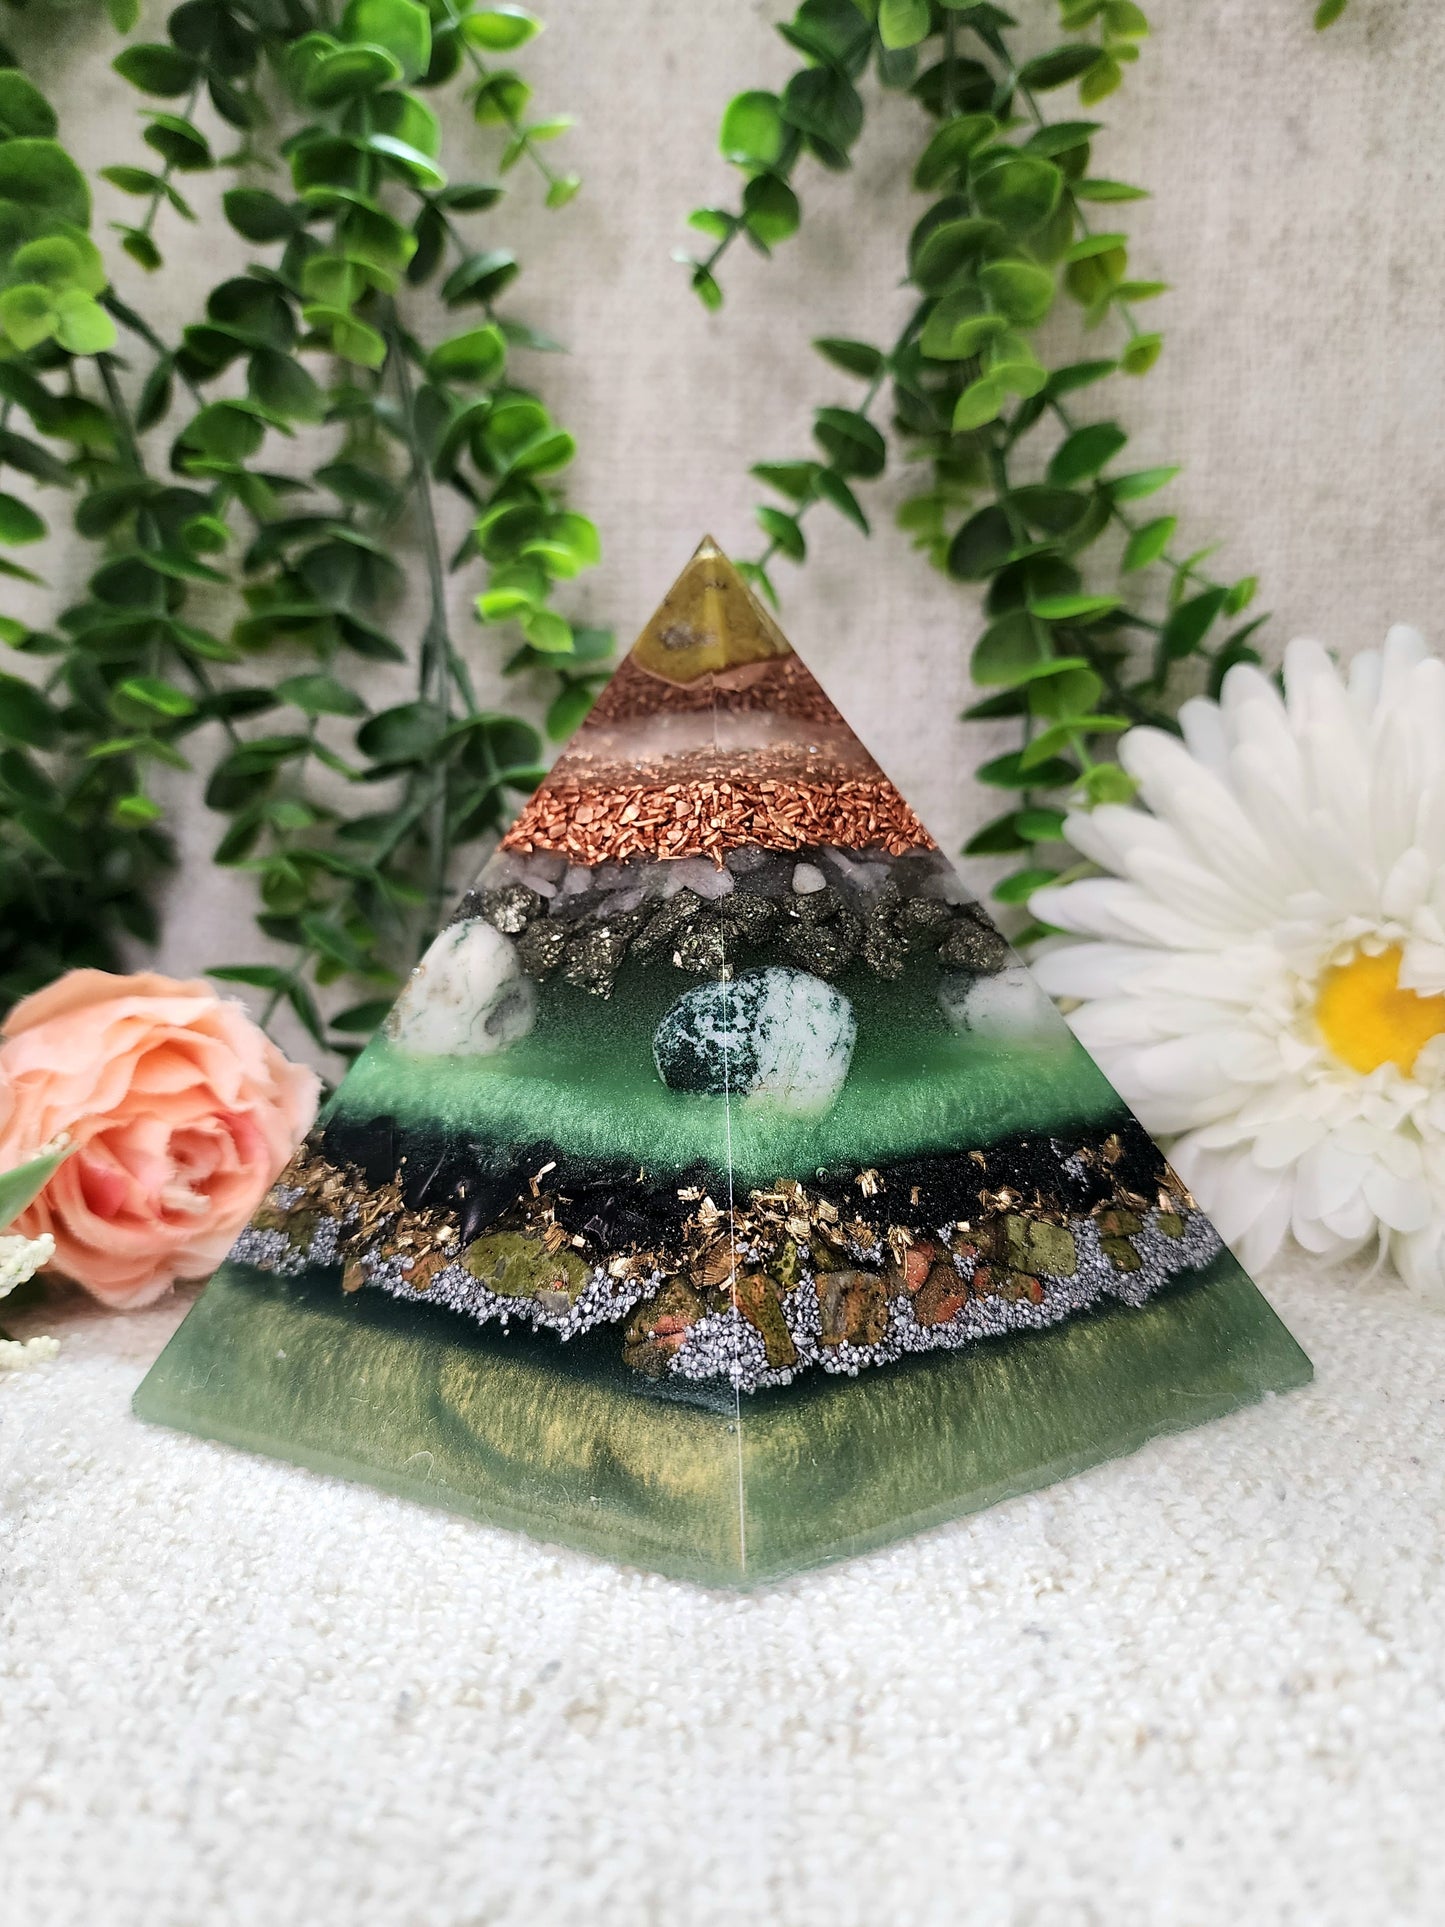 SPRING EQUINOX - Special Edition Hexagonal Pyramid! - EMF Protector - Green Opal, Morganite, Pyrite, Tree Agate, Shungite and Unakite with Copper, Brass and Aluminum Metals